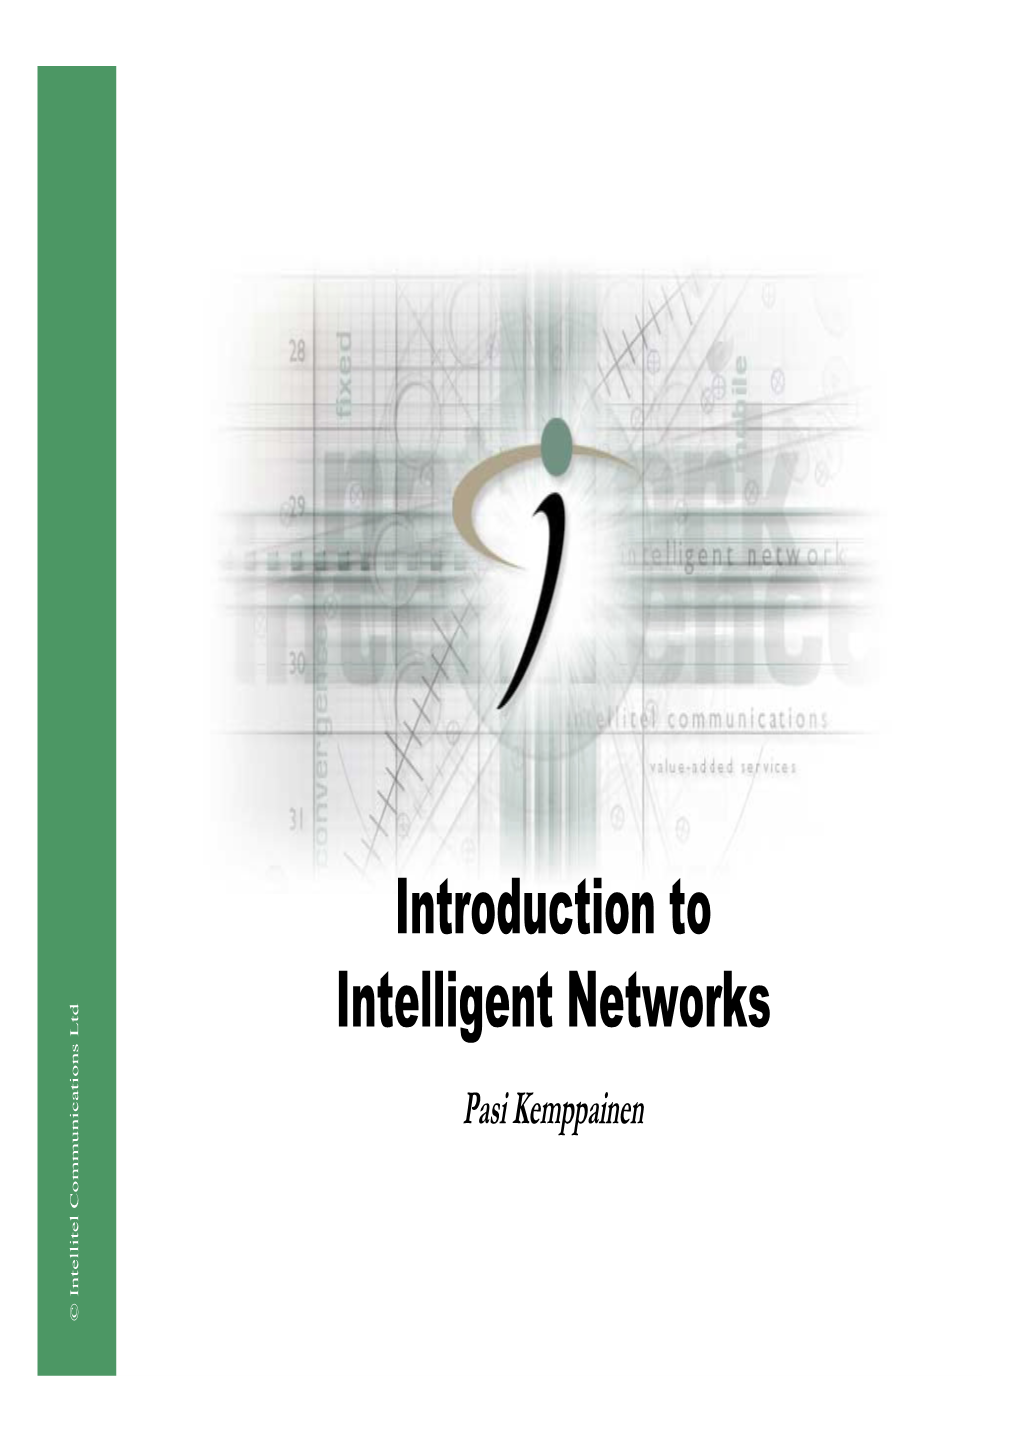 Introduction to Intelligent Networks